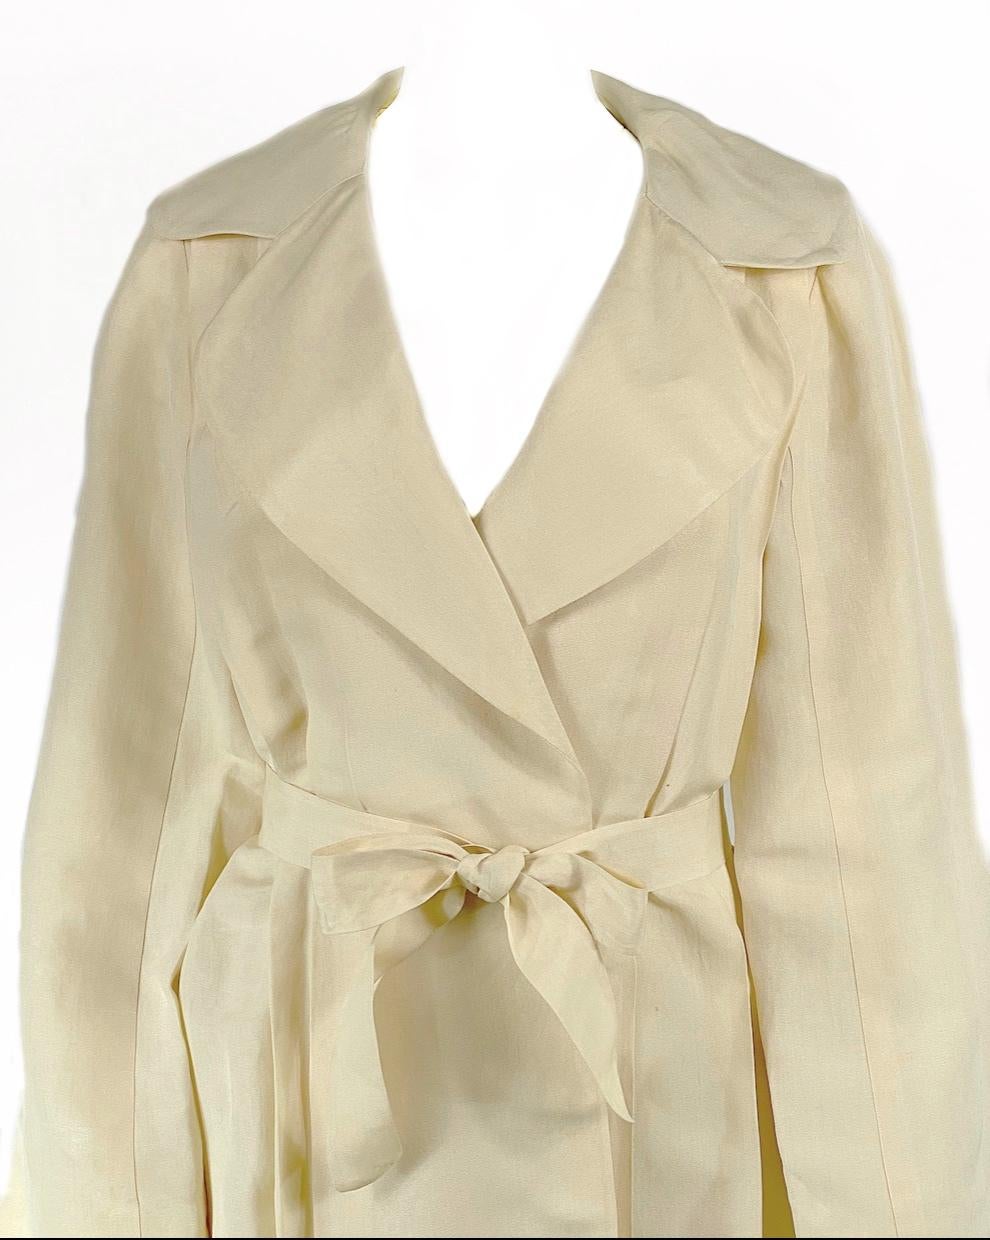 2006 LANVIN Cream/ Ivory Linen Coat Size 40 In Good Condition For Sale In Beverly Hills, CA